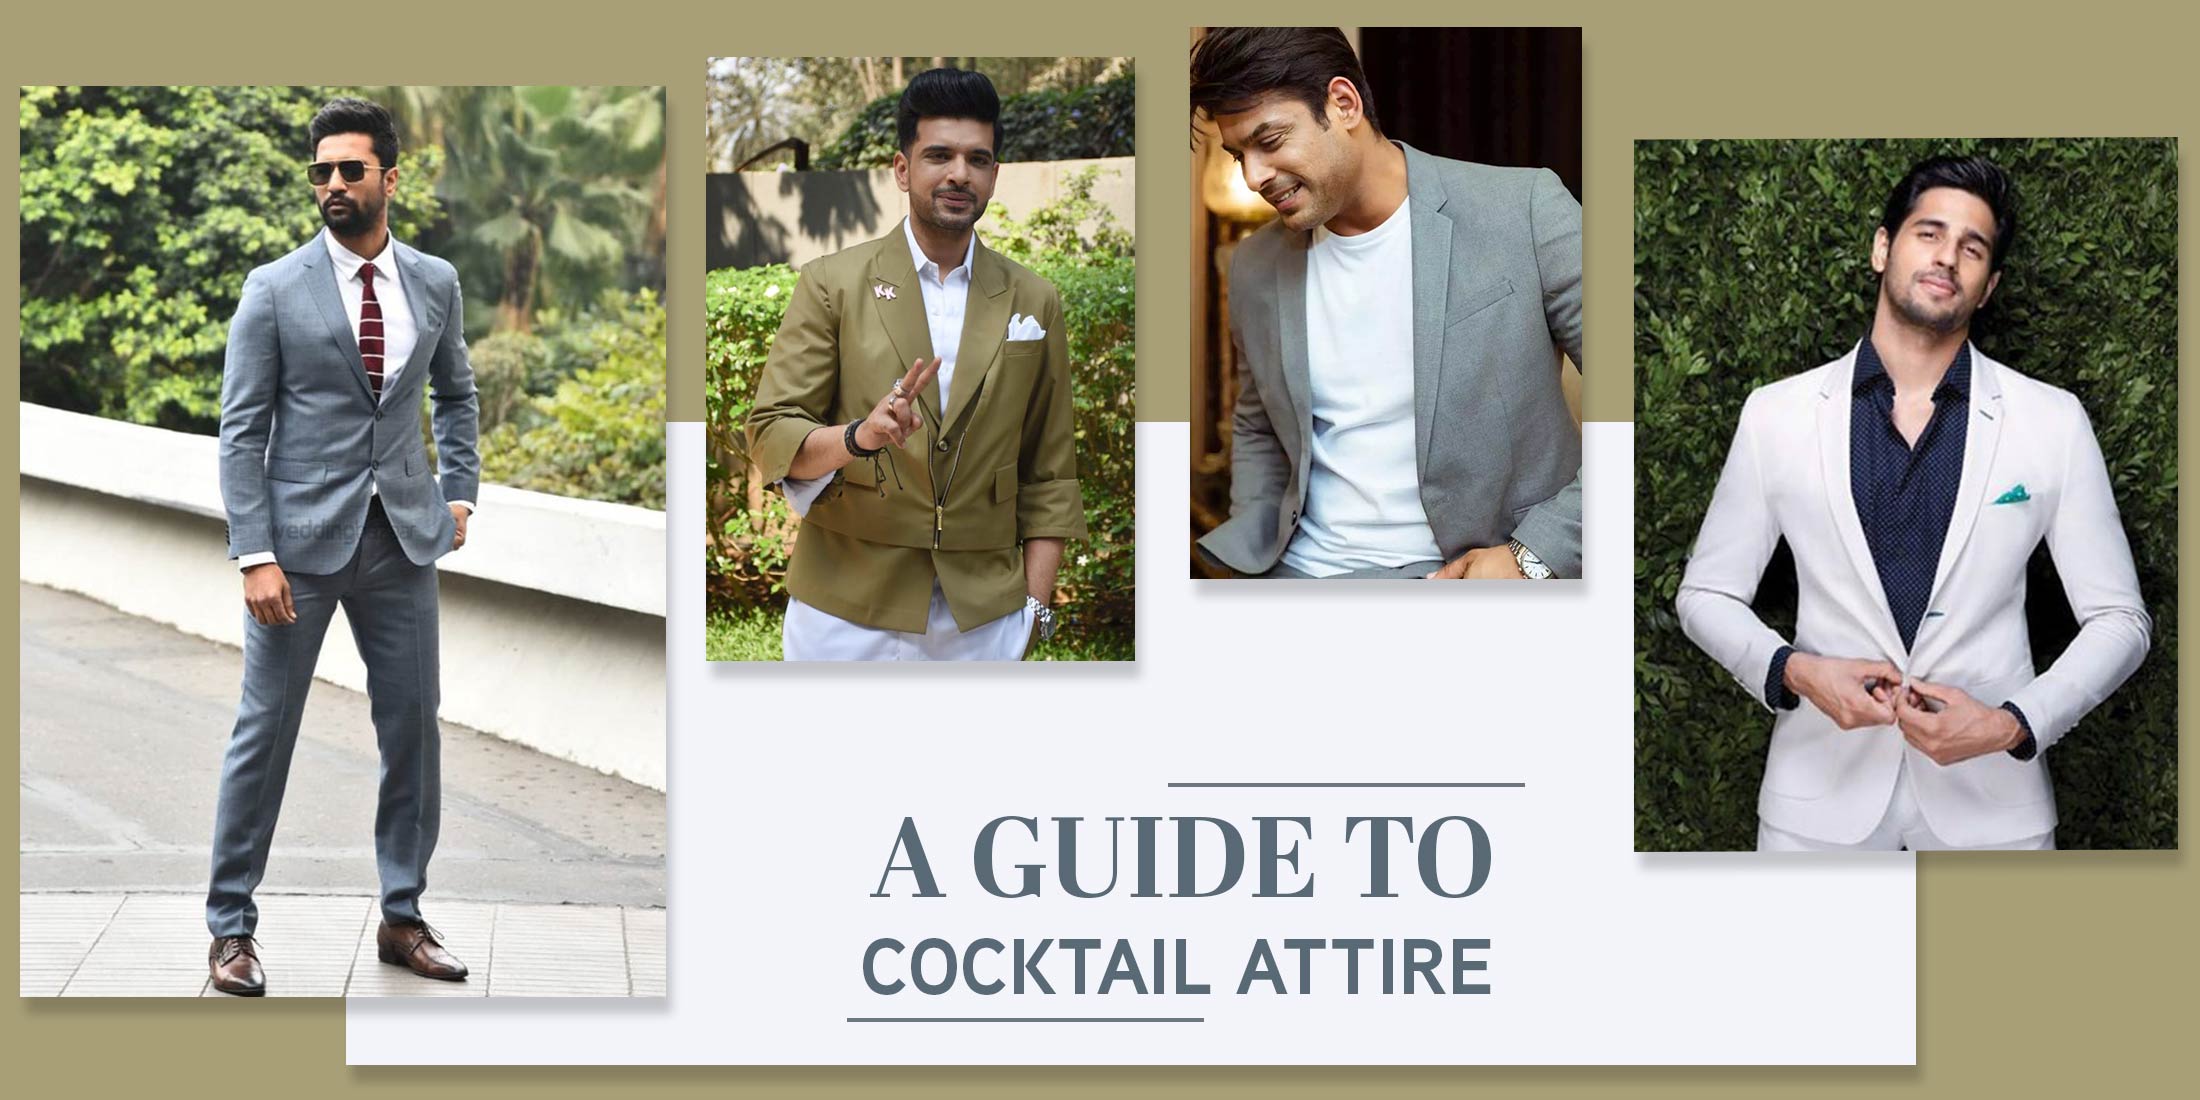 Best Cocktail Attire For Men - What To Wear Cocktail Dress For Men